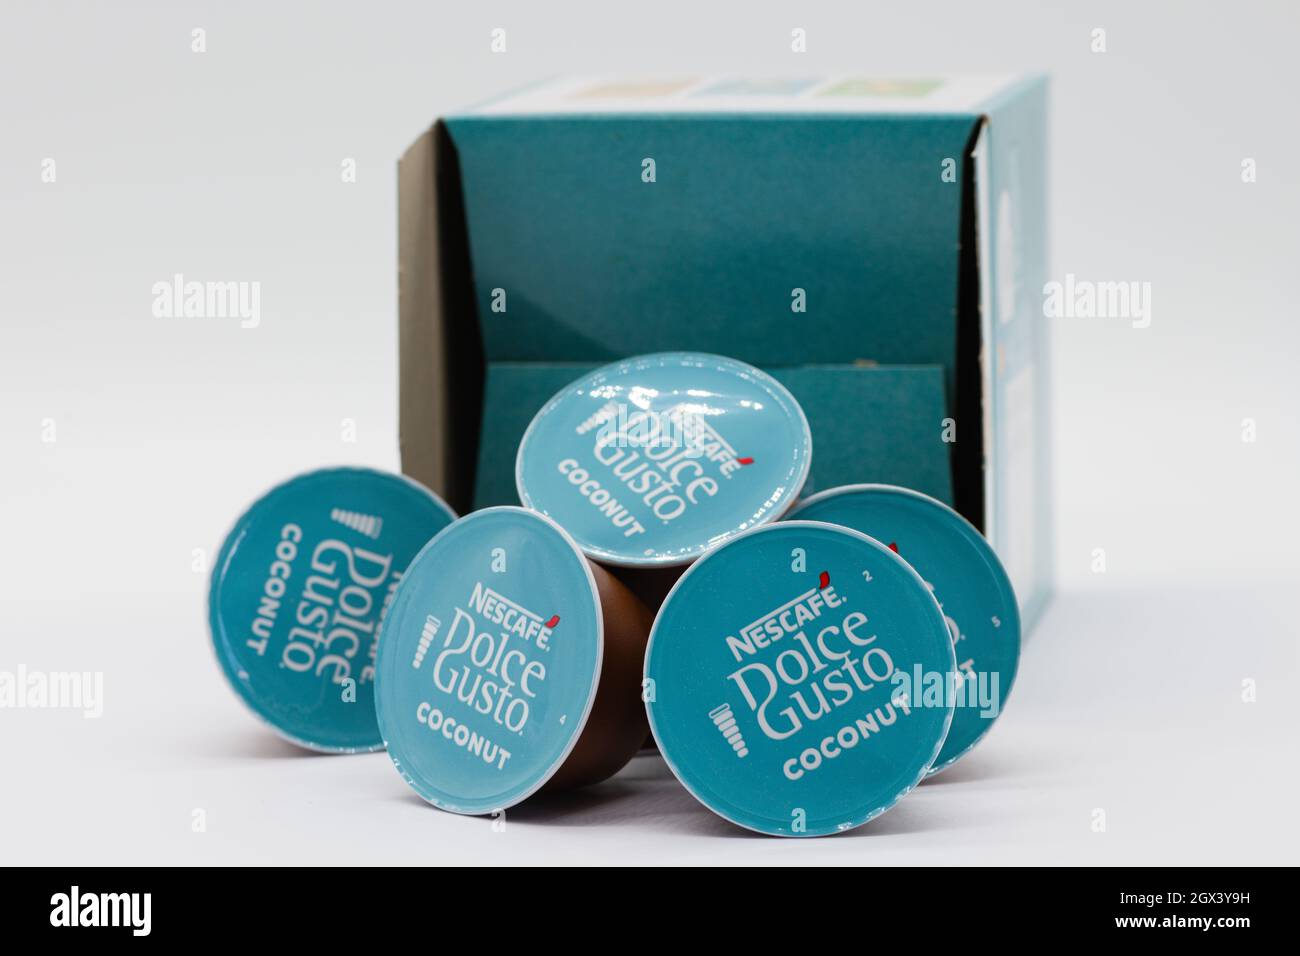 Irvine, Scotland, UK - September, 29, 2021: One box of Nescafe Dolce-Gusto  branded Coconut flat white coffee pods in recyclable packaging displaying t  Stock Photo - Alamy